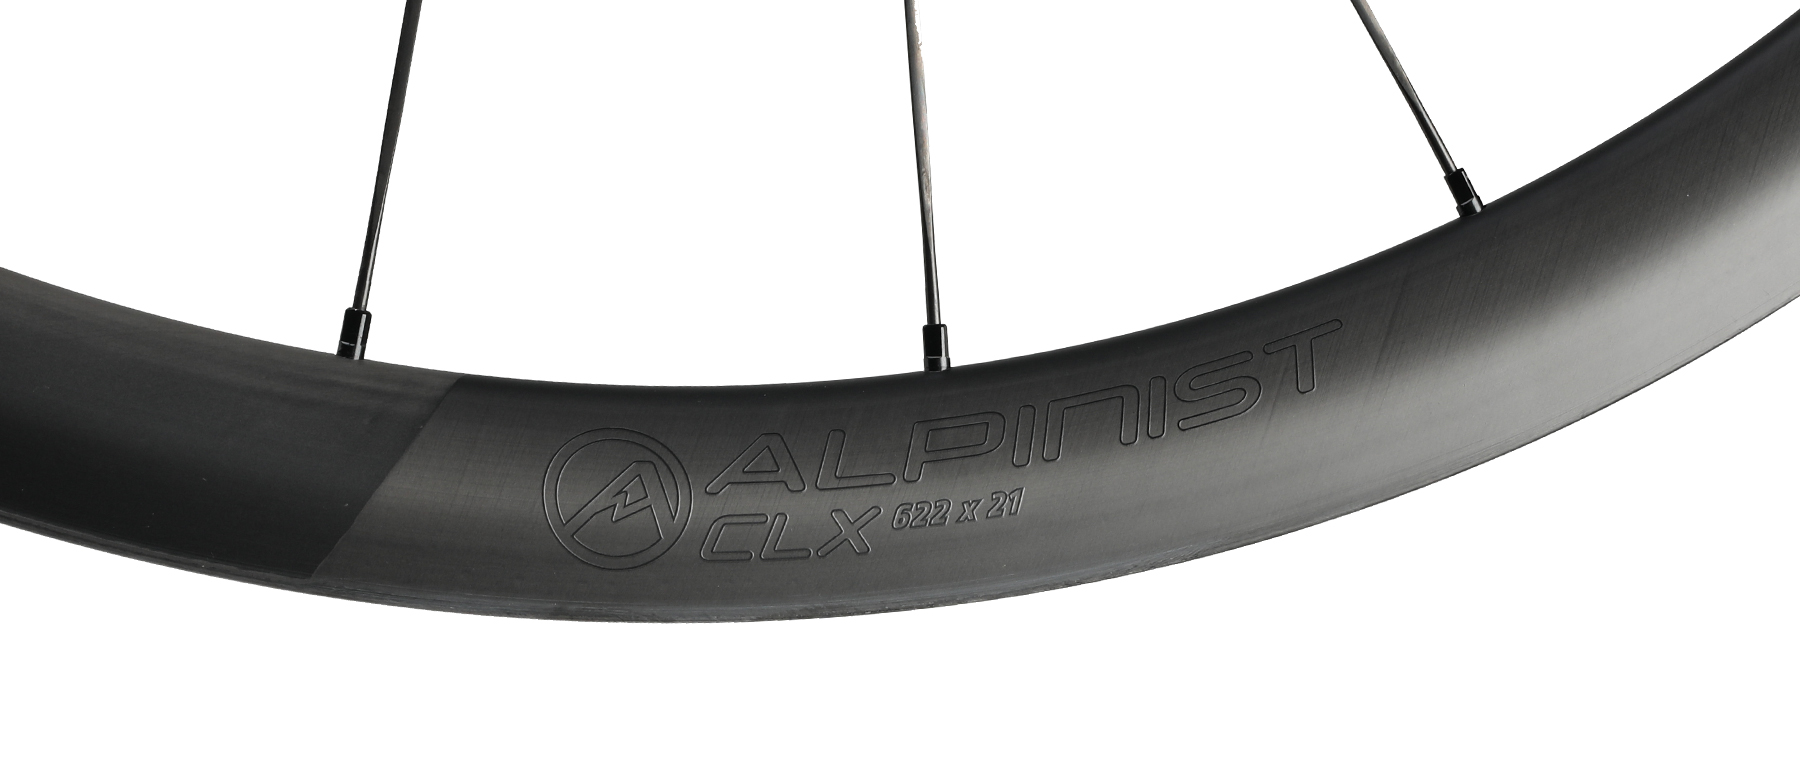 Roval Alpinist CLX Front Wheel